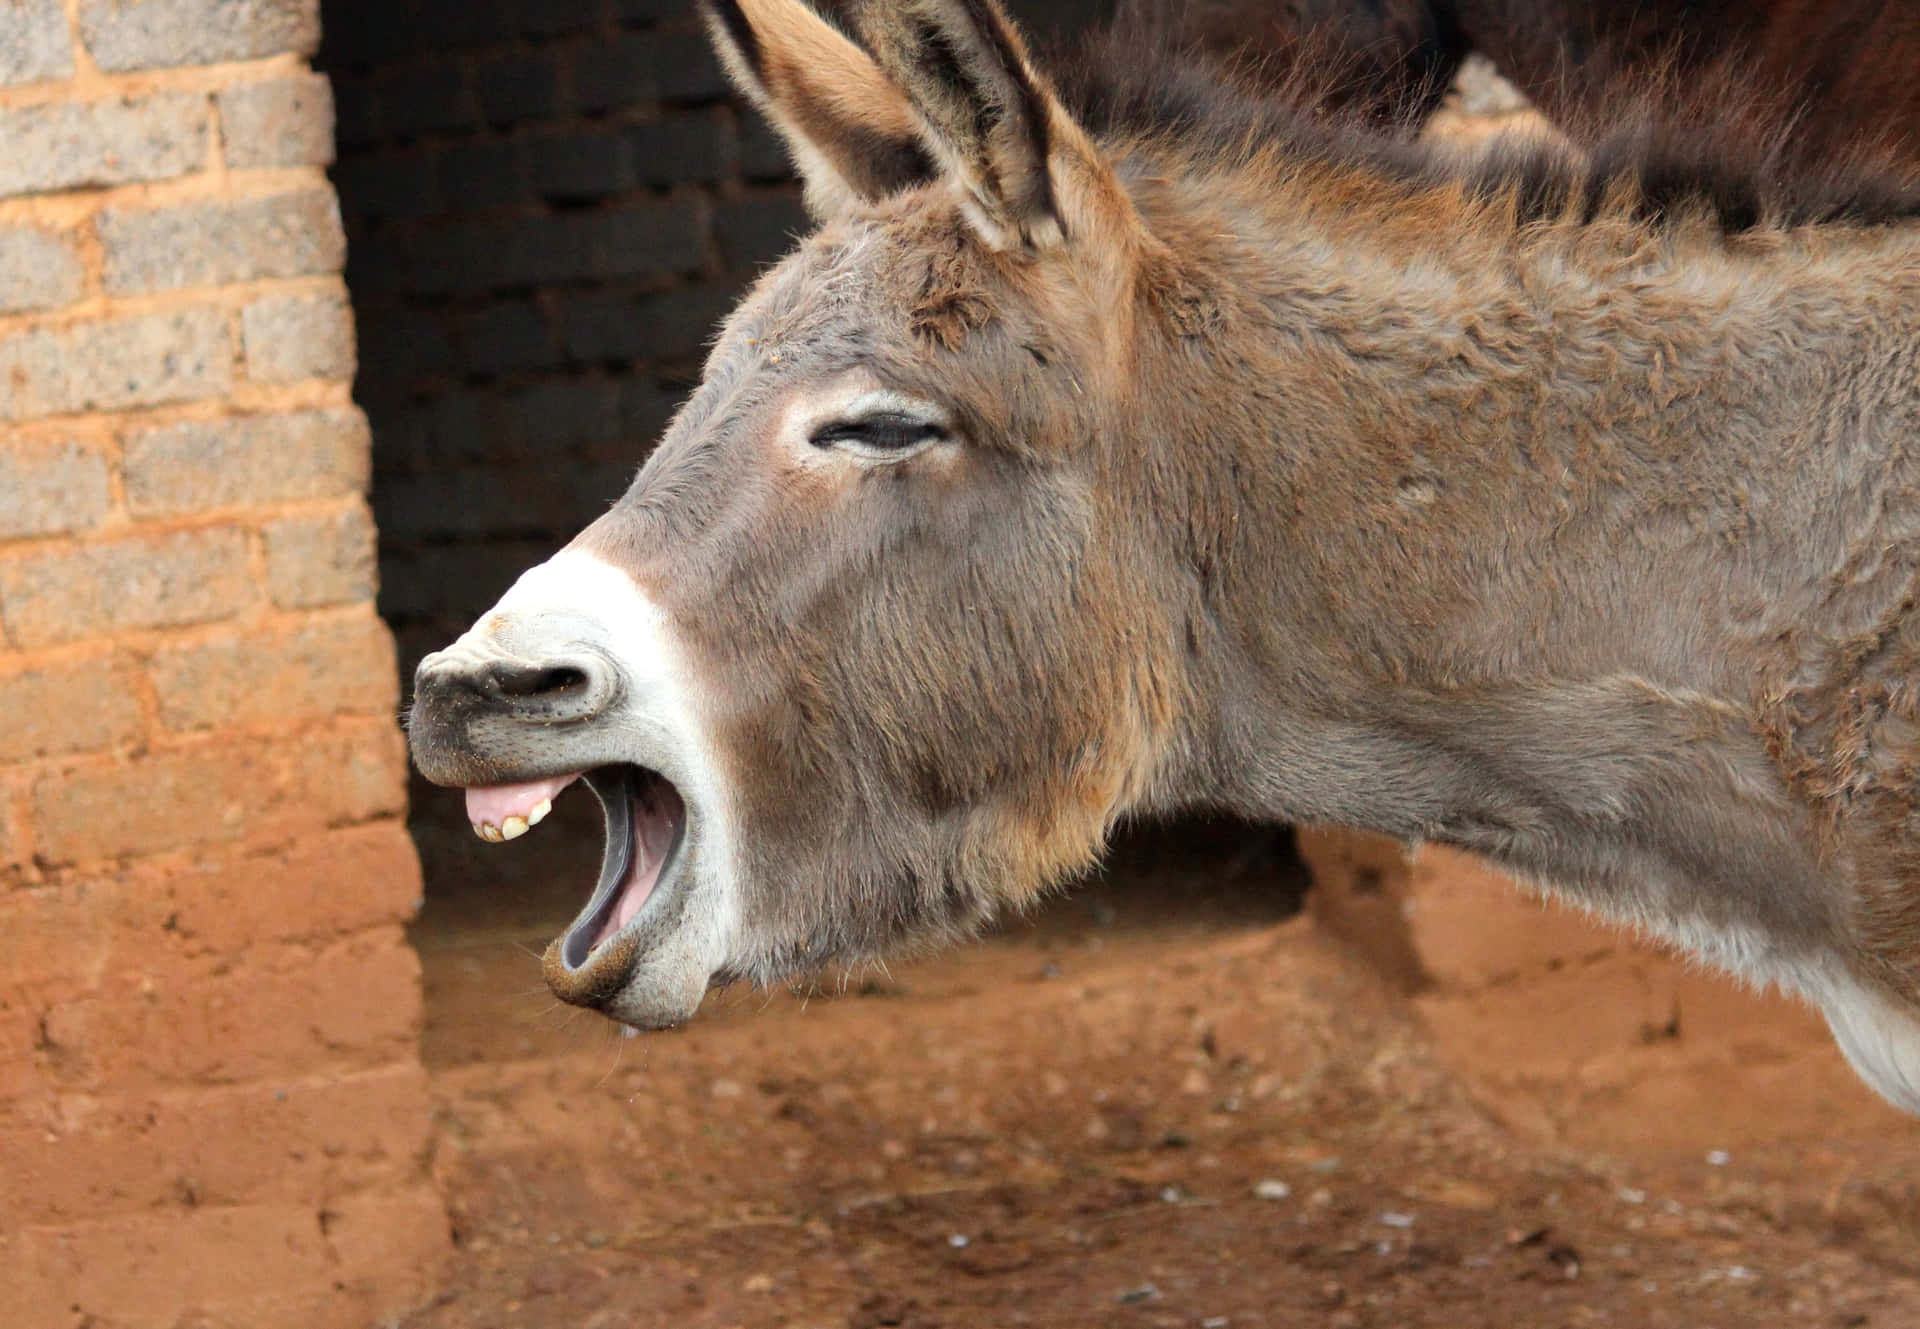 “Happily posing for the camera, this donkey is ready to get its moment of fame.”